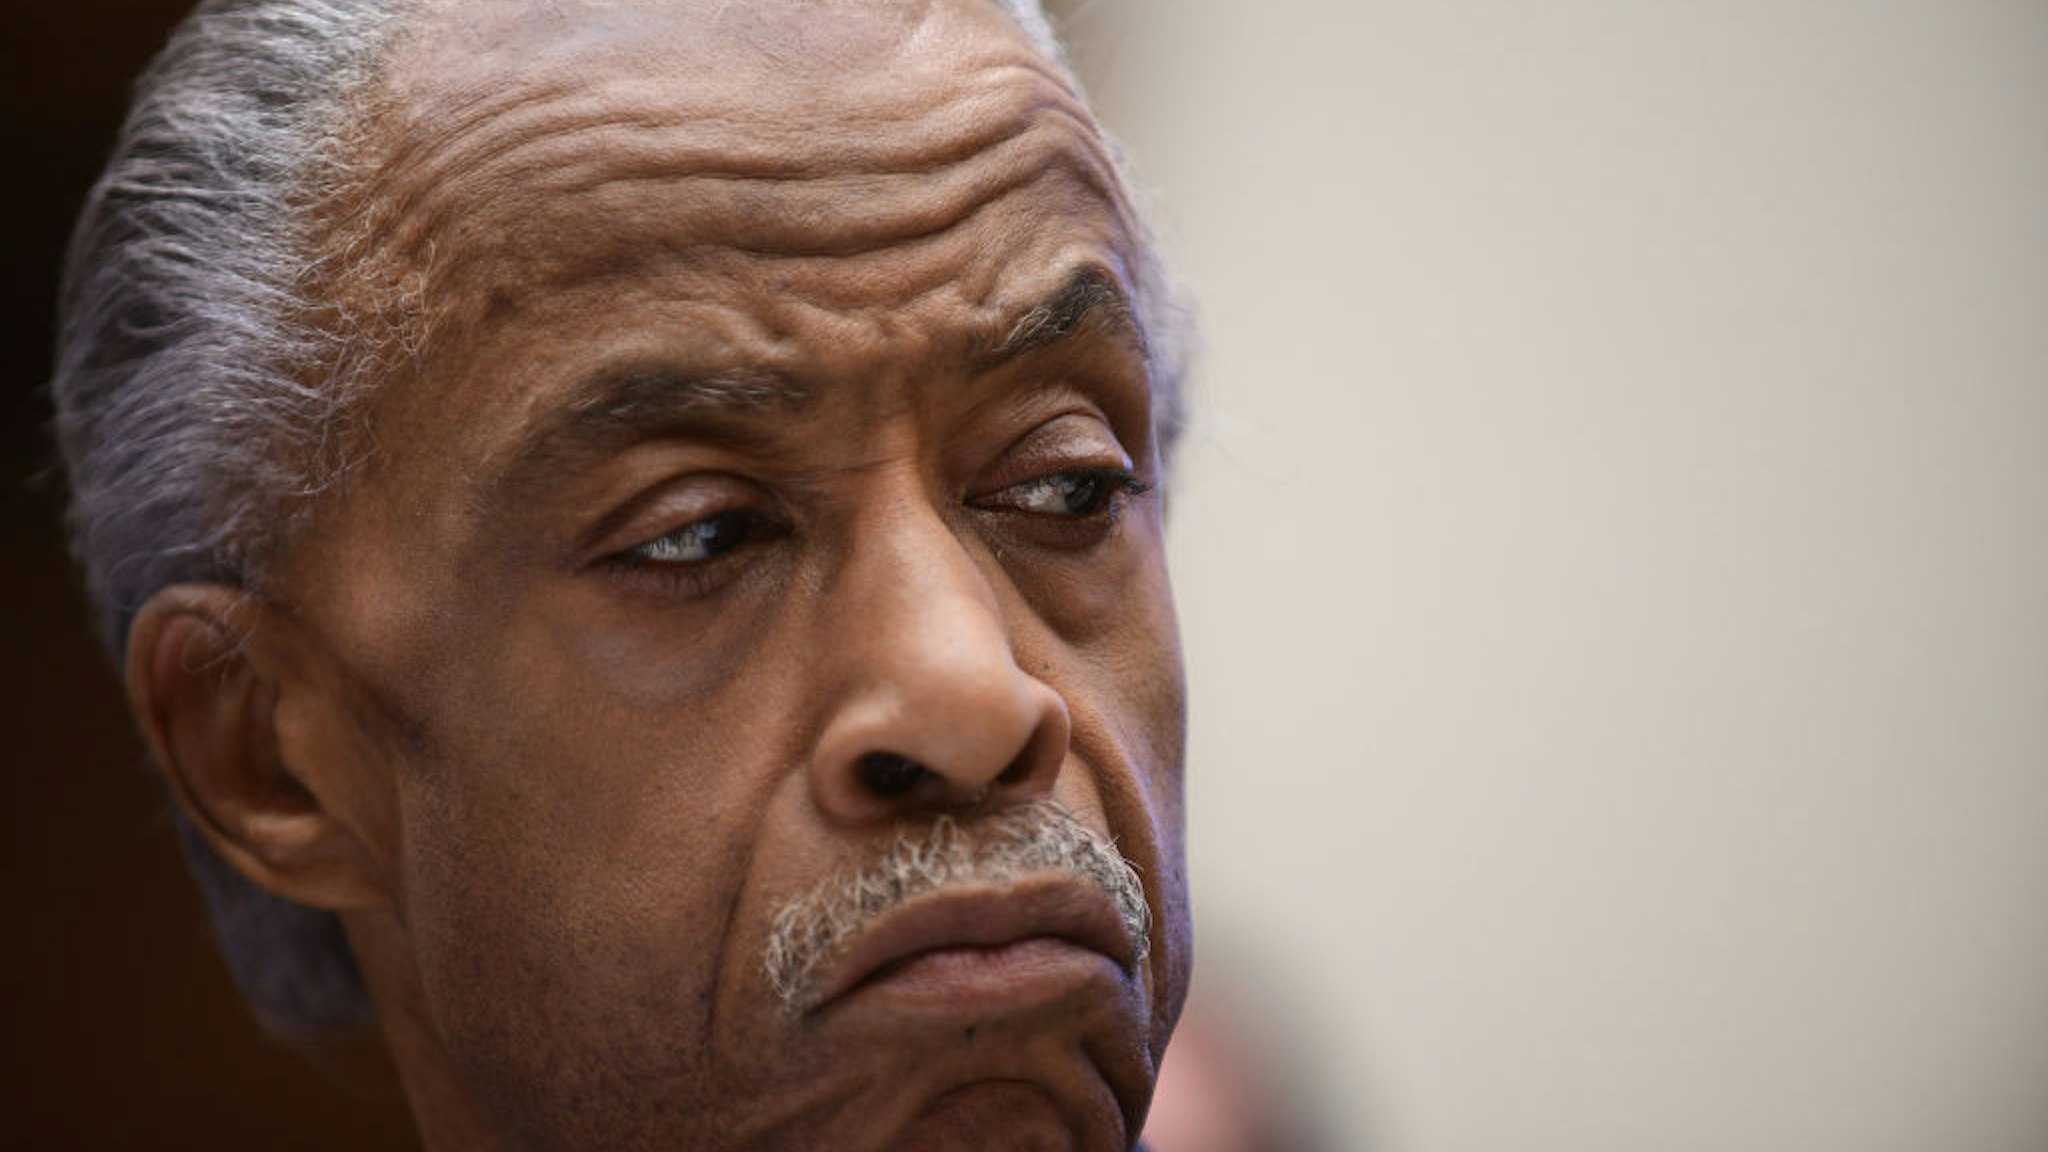 Rev. Al Sharpton attends a hearing before the House Judiciary Committee on policing practices in the United States on September 19, 2019 in Washington, DC.